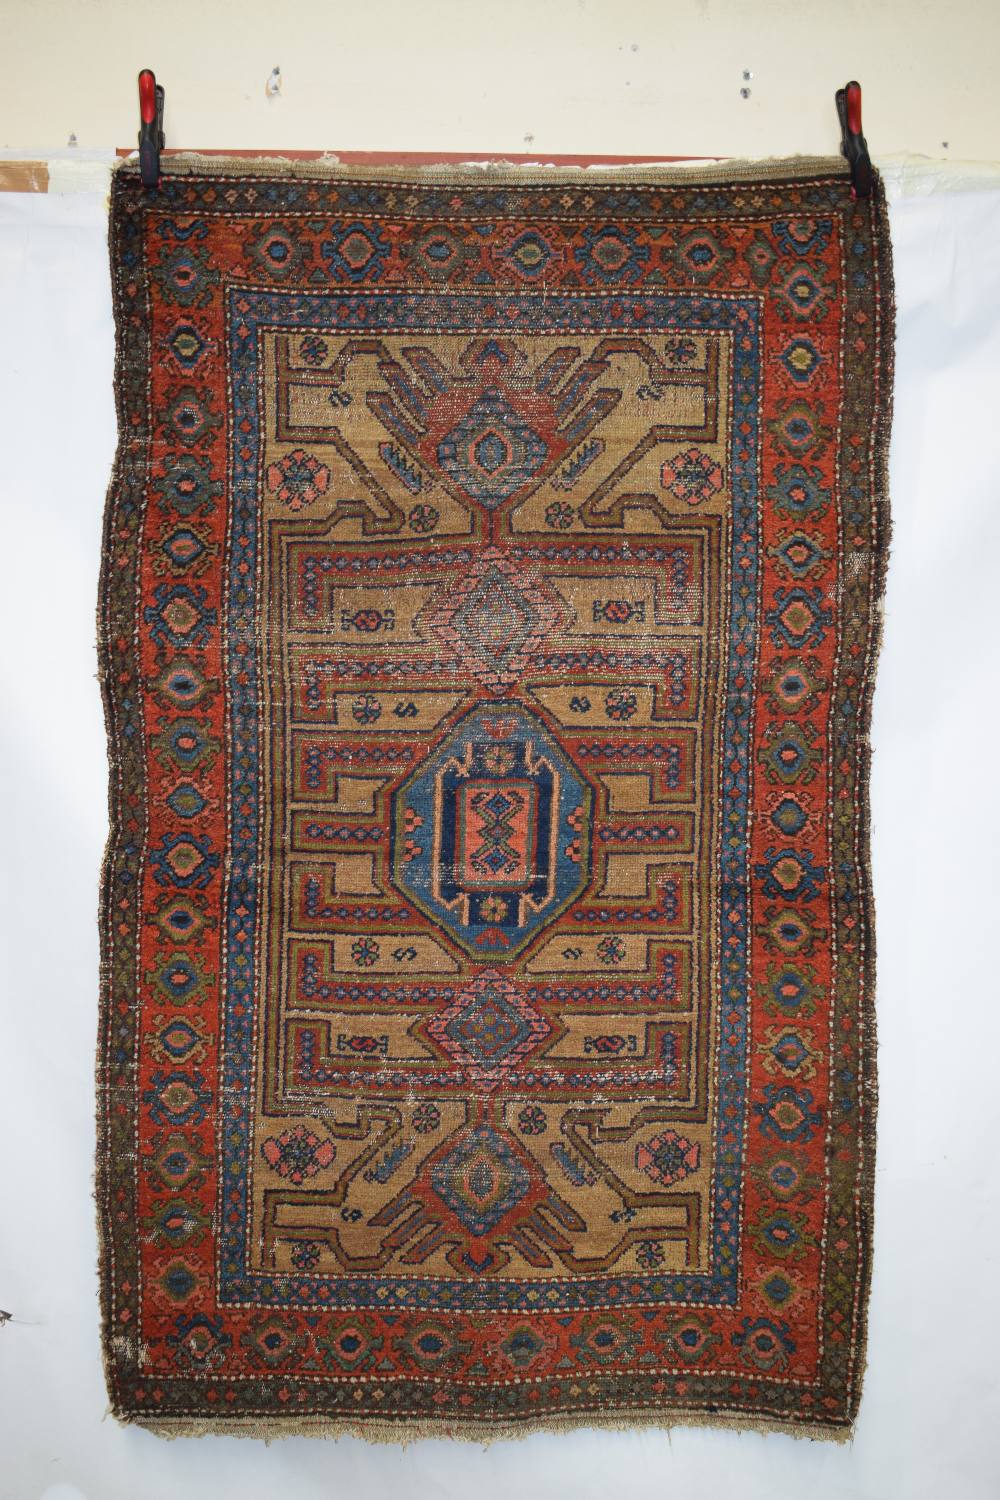 Kurdish rug, north west Persia, early 20th century, 6ft. 5in. x 3ft. 11in. 1.96m. x 1.20m. Overall